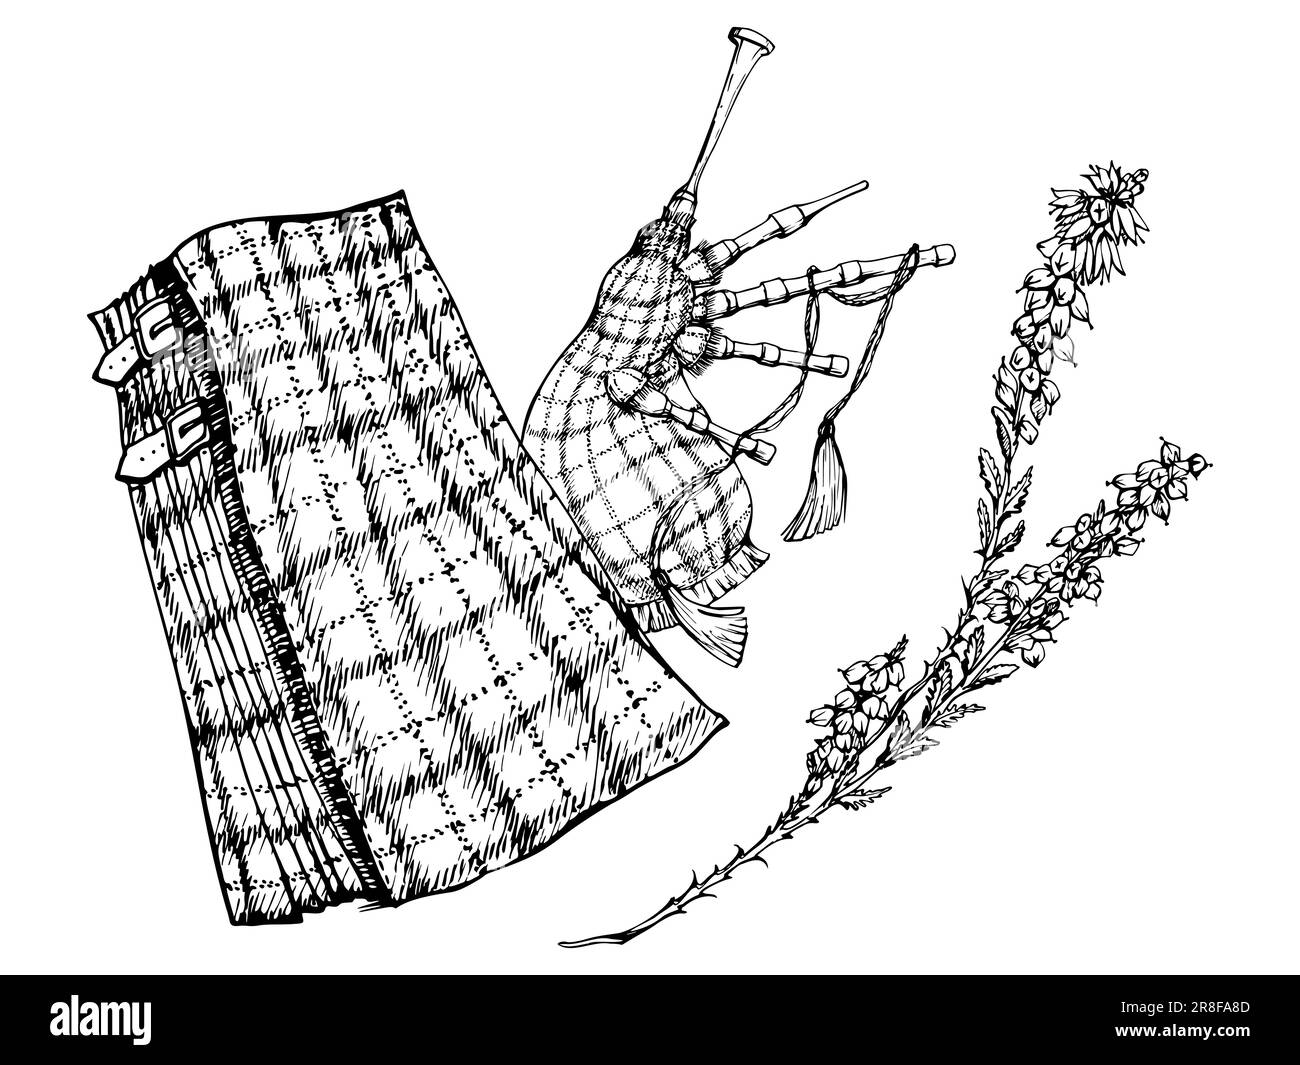 Ink hand drawn vector sketch. Scottish traditional menswear, tartan pattern kilt and bagpipes with heather flower branch. Design for tourism, travel Stock Vector